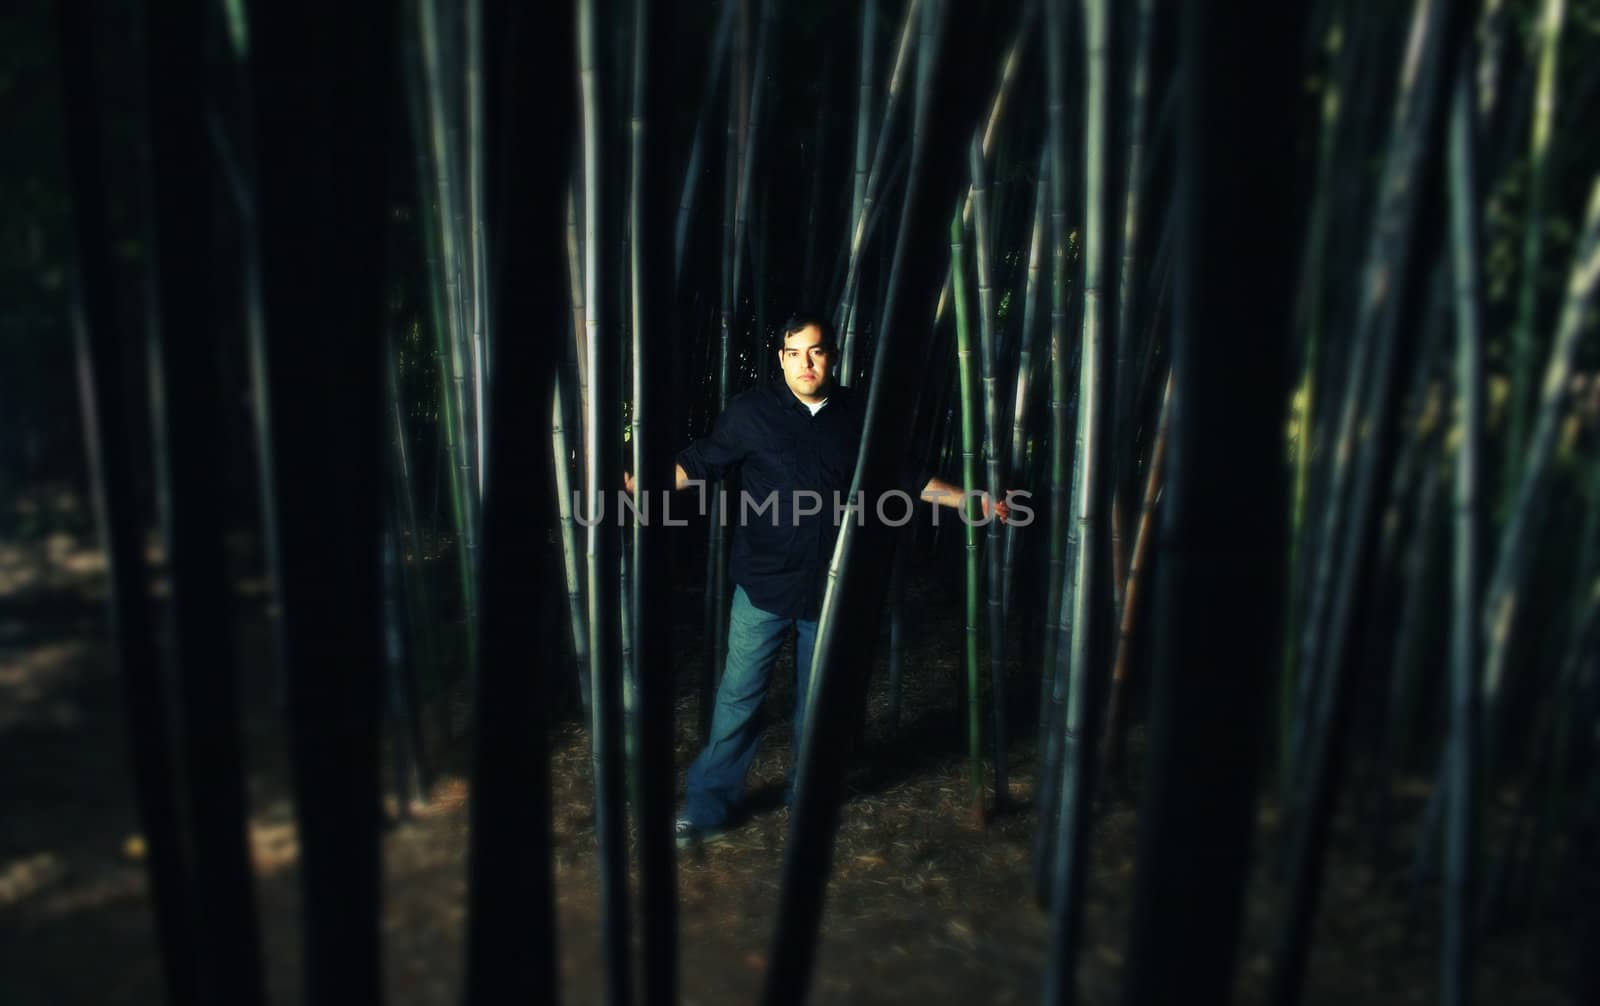 A cross process photo of a man standing in a bamboo forest